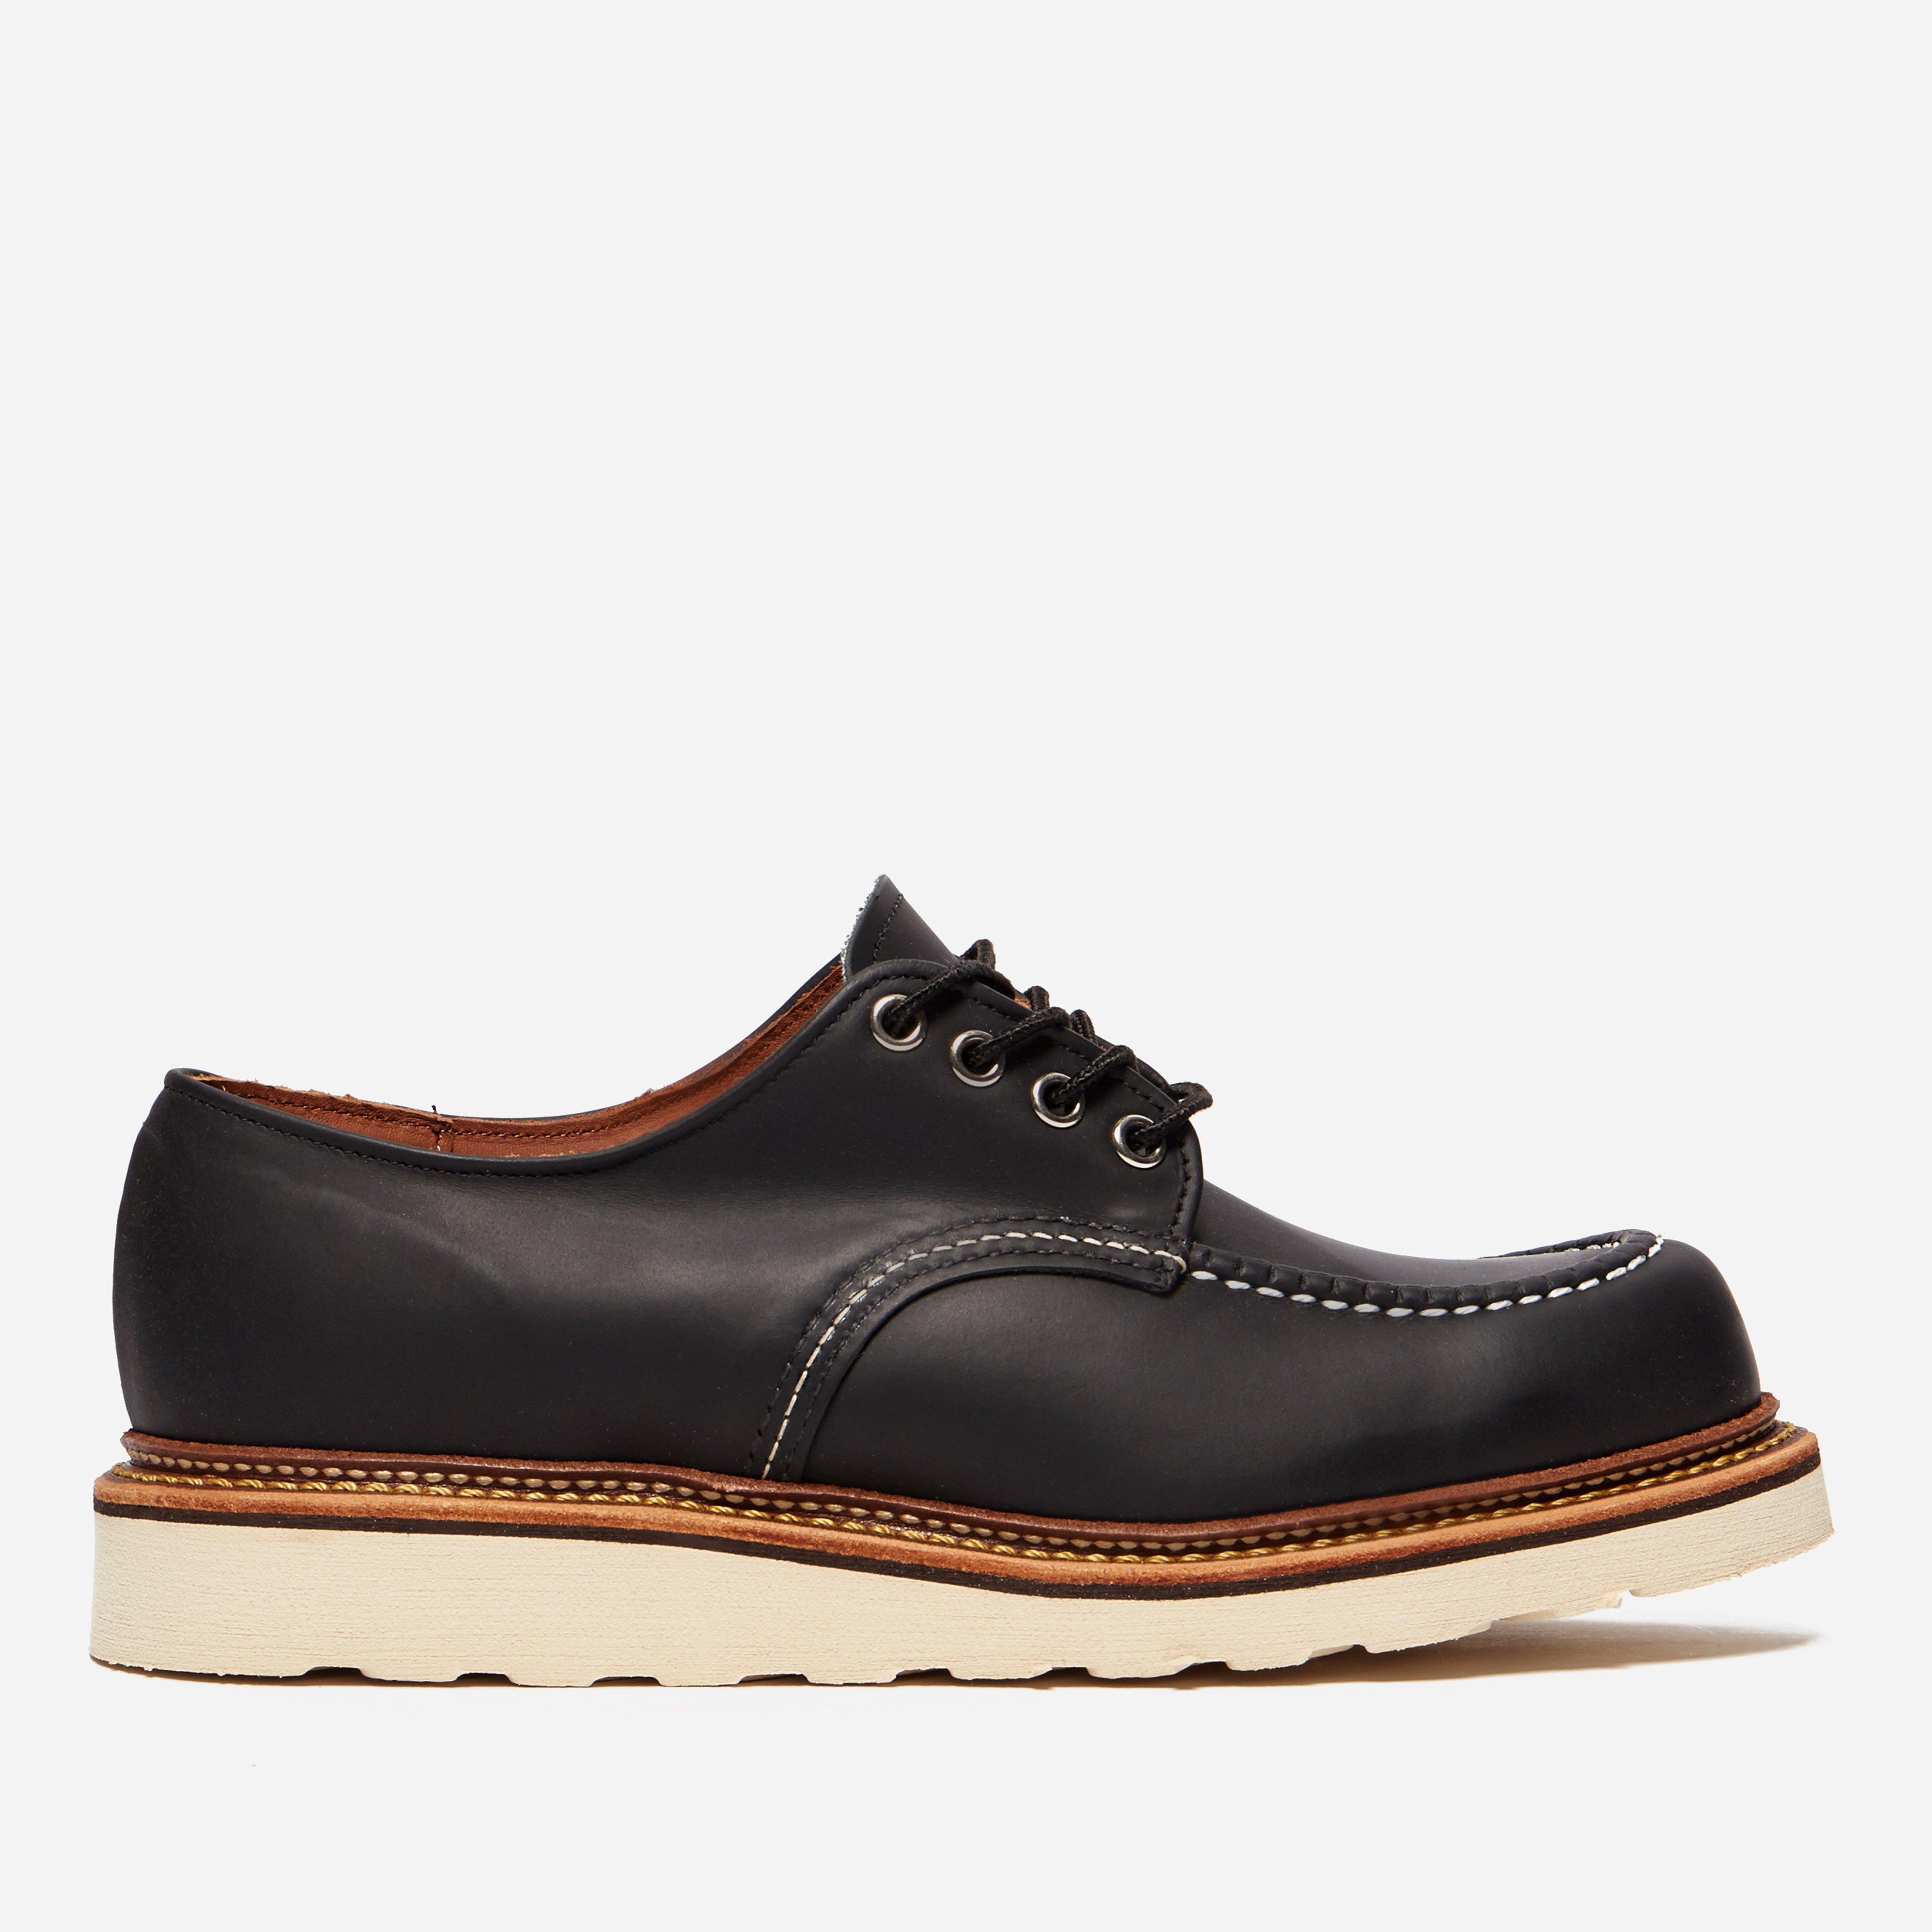 Red Wing 8106 Heritage Work Classic Oxford in Black for Men - Lyst